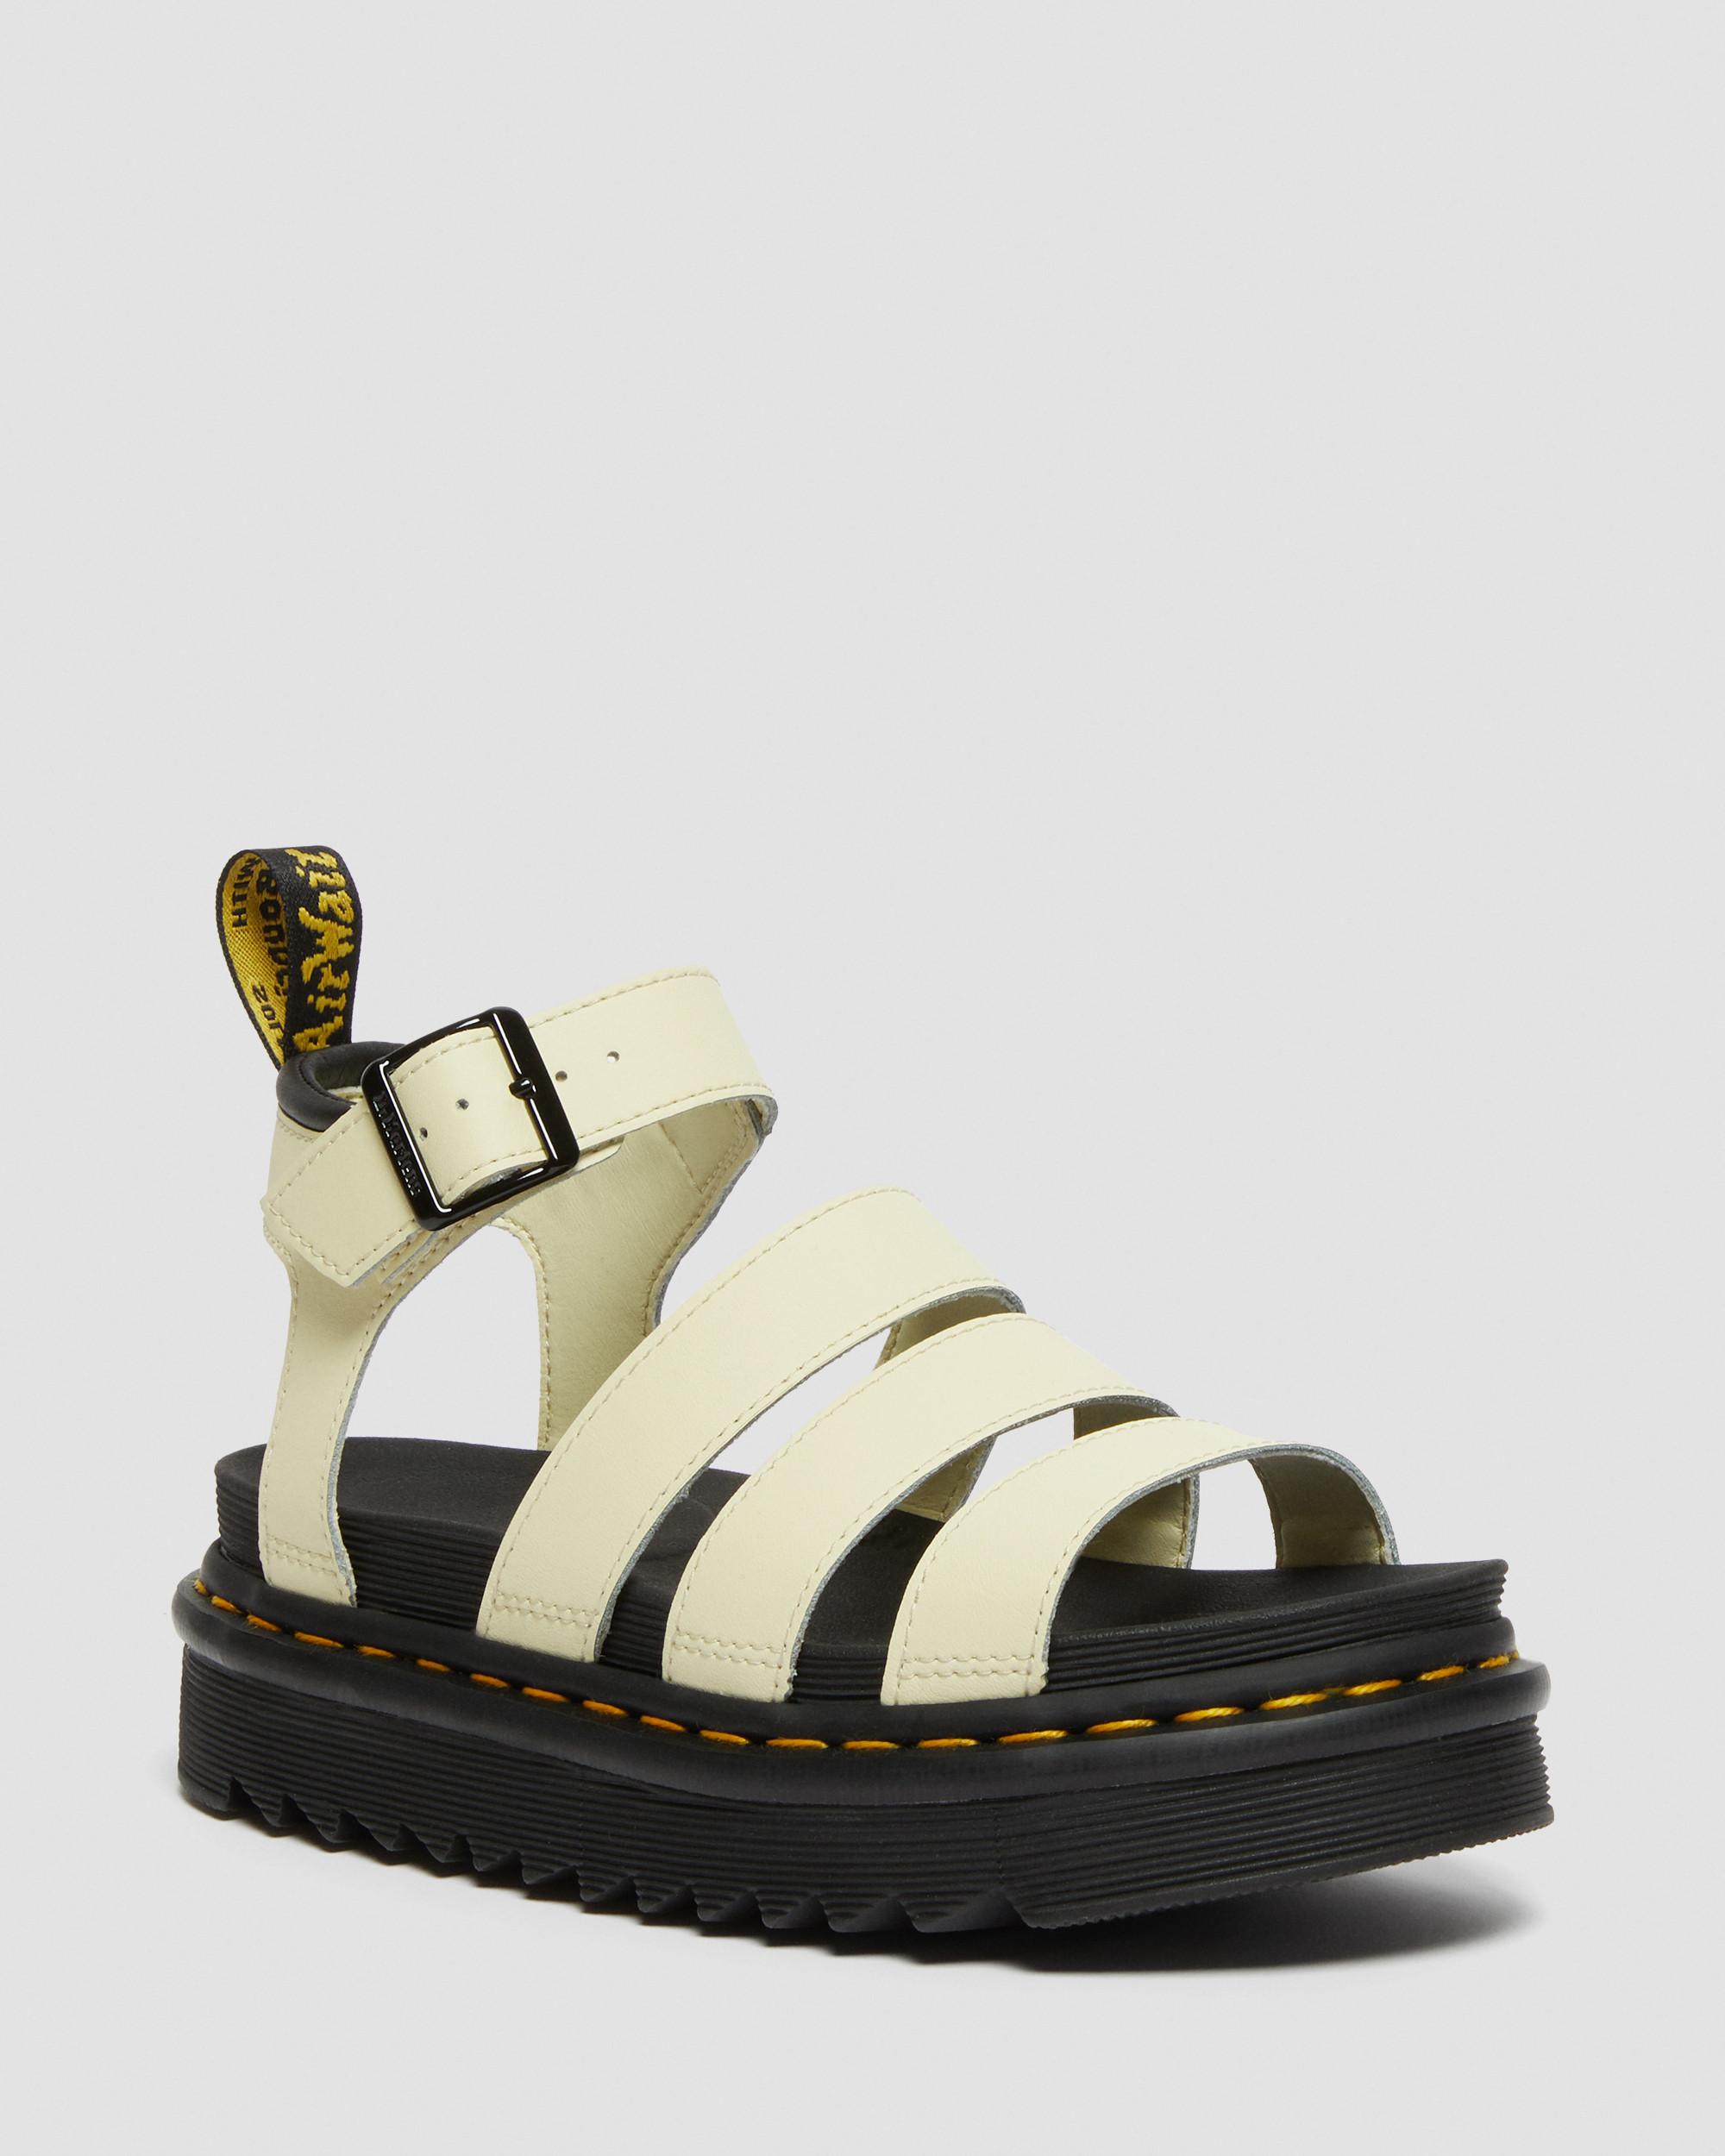 Blaire Hydro Leather Strap Sandals in Black